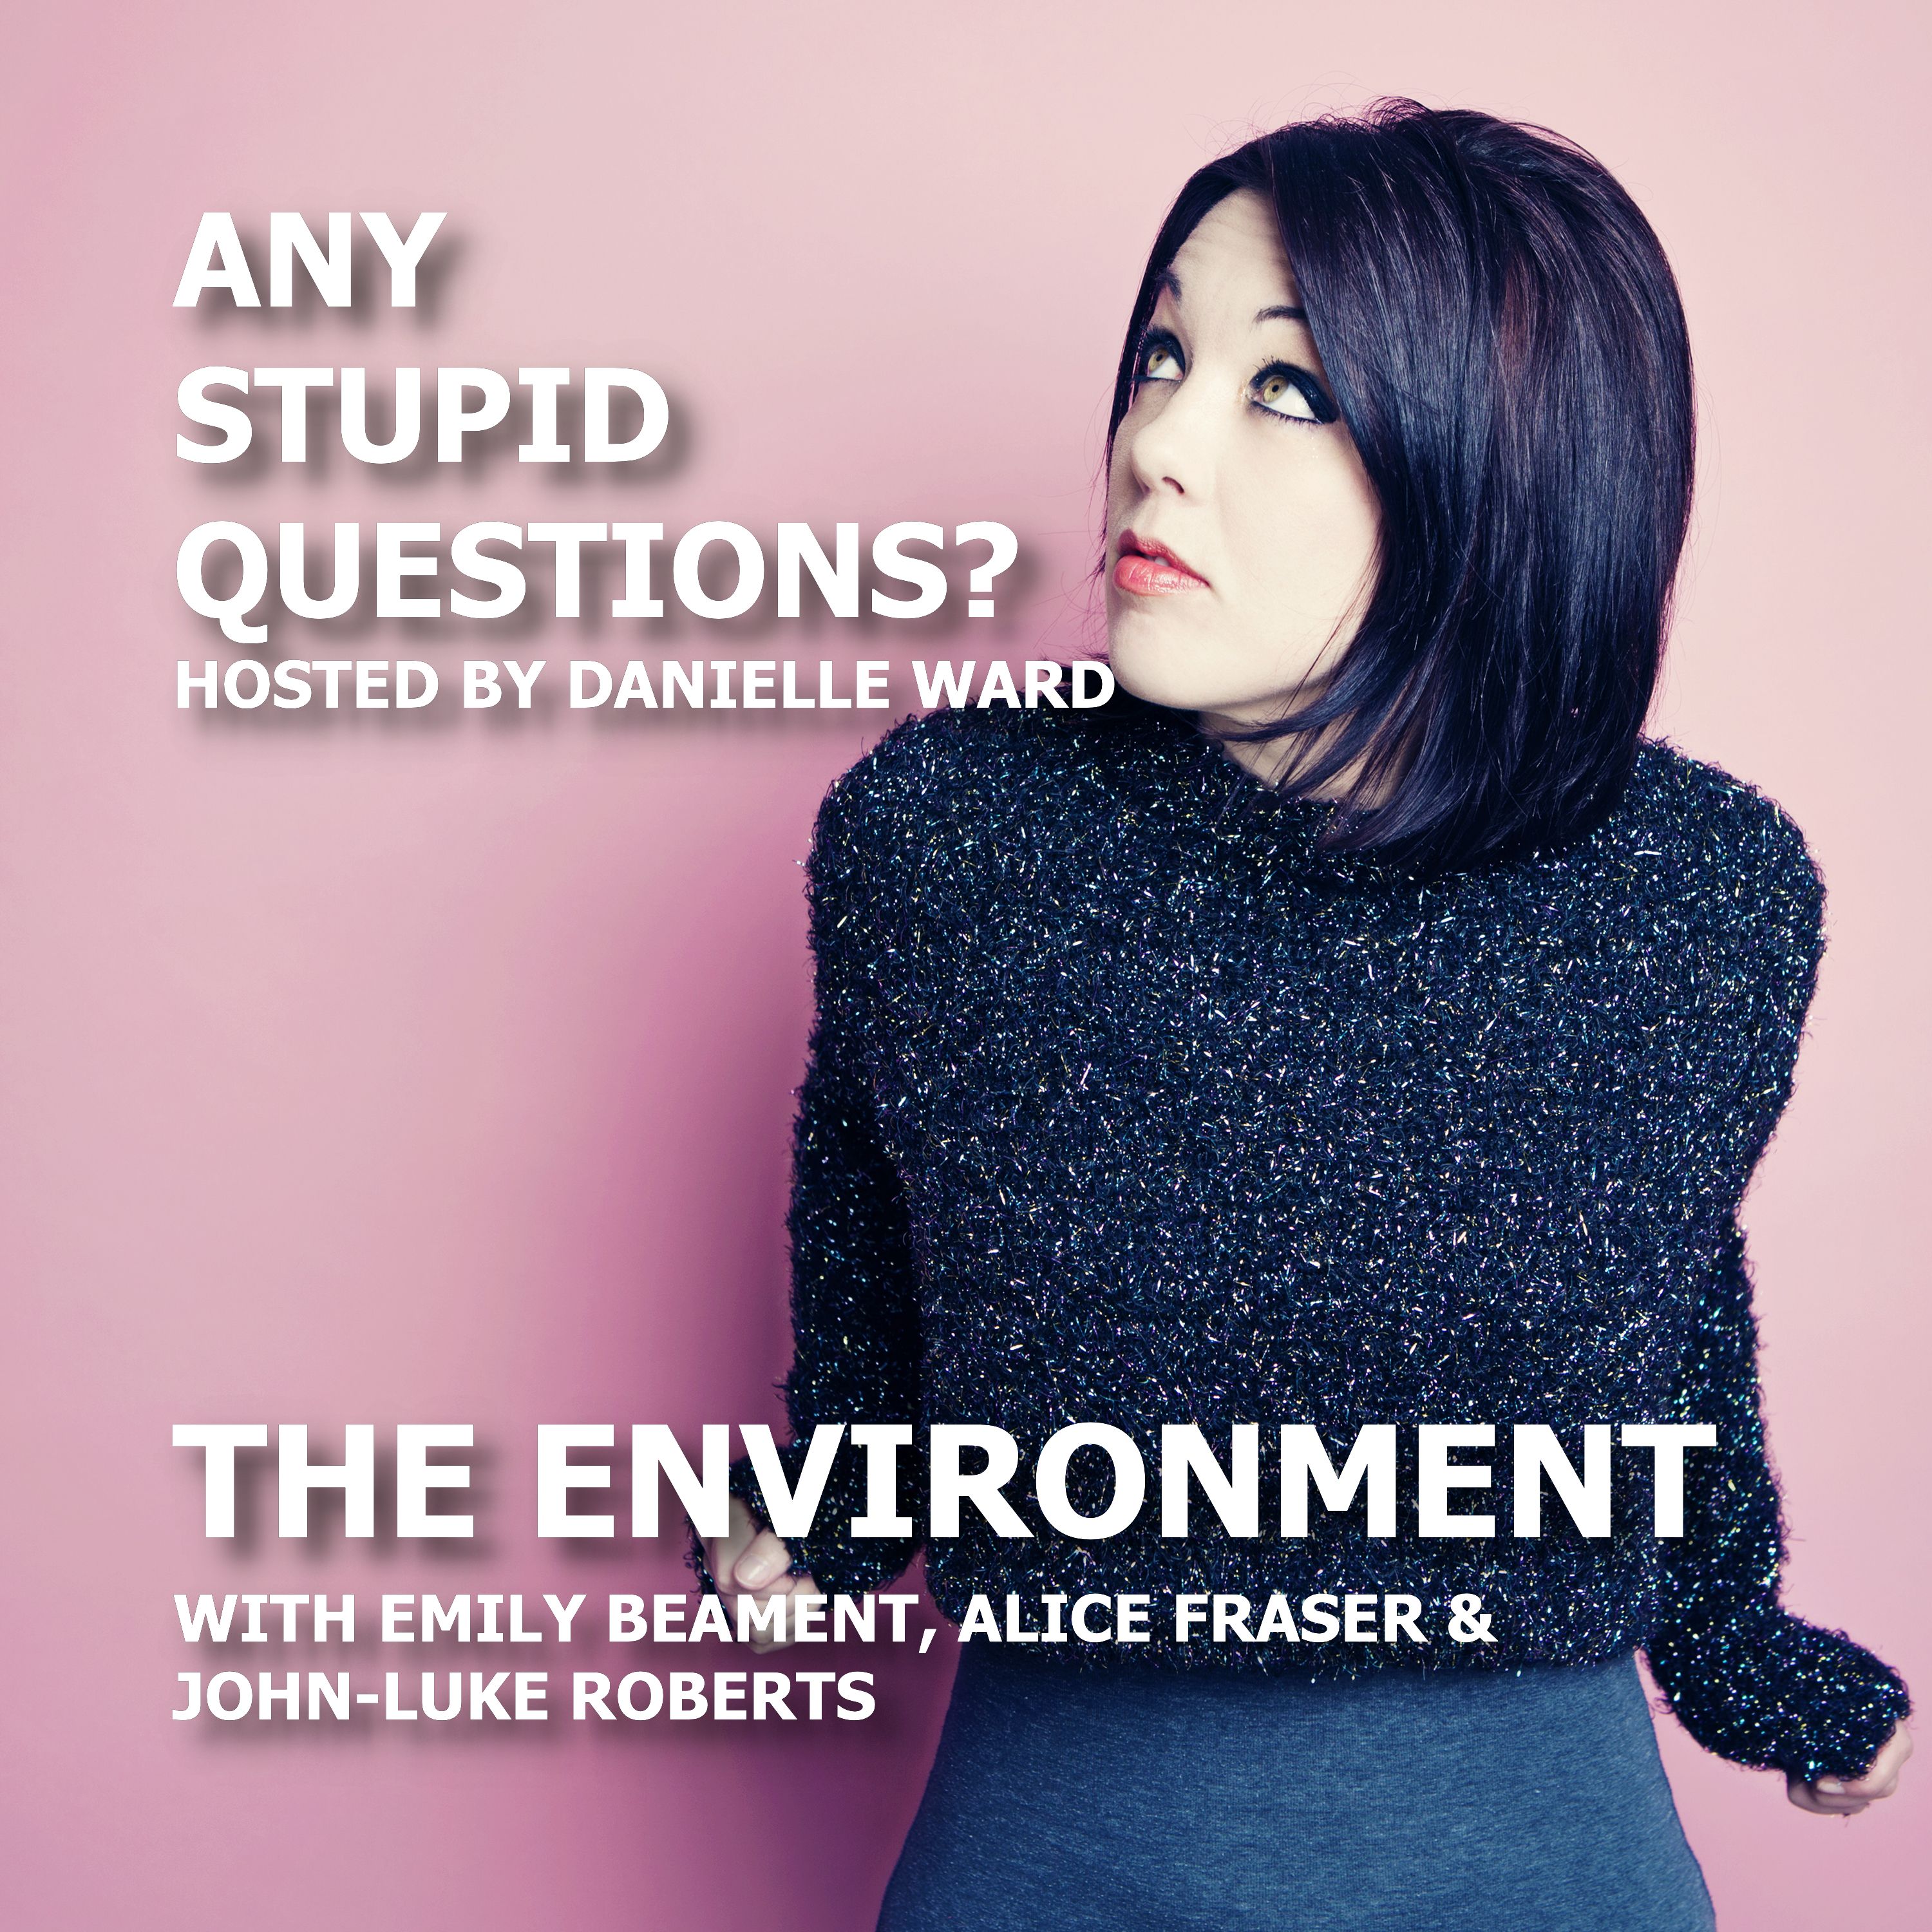 Any Stupid Questions about... The Environment?